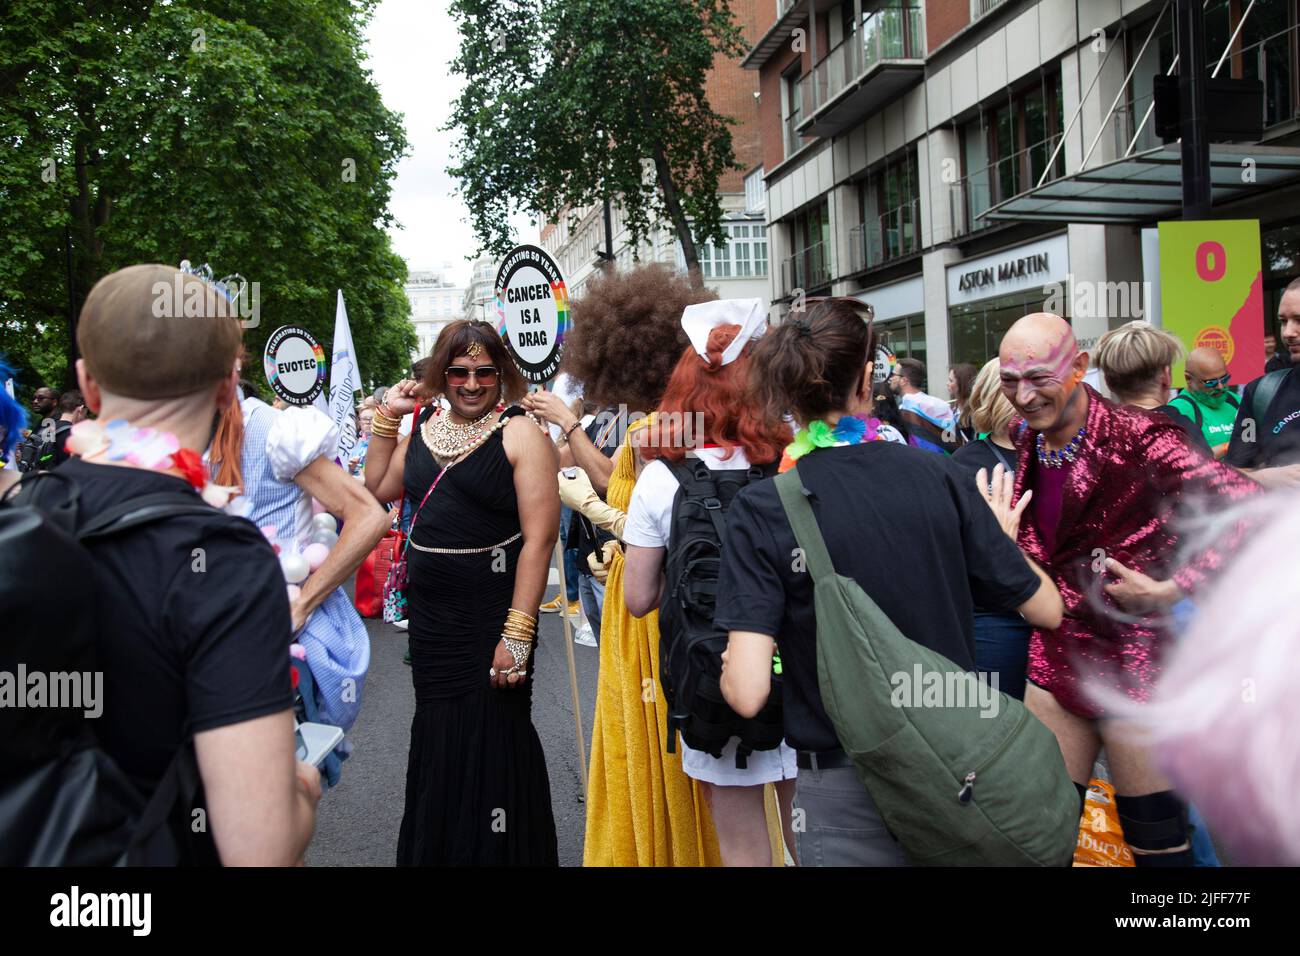 Gay Pride March - Marchers For Cancer is a Drag Charity-  2 July 2022,  London, UK Stock Photo